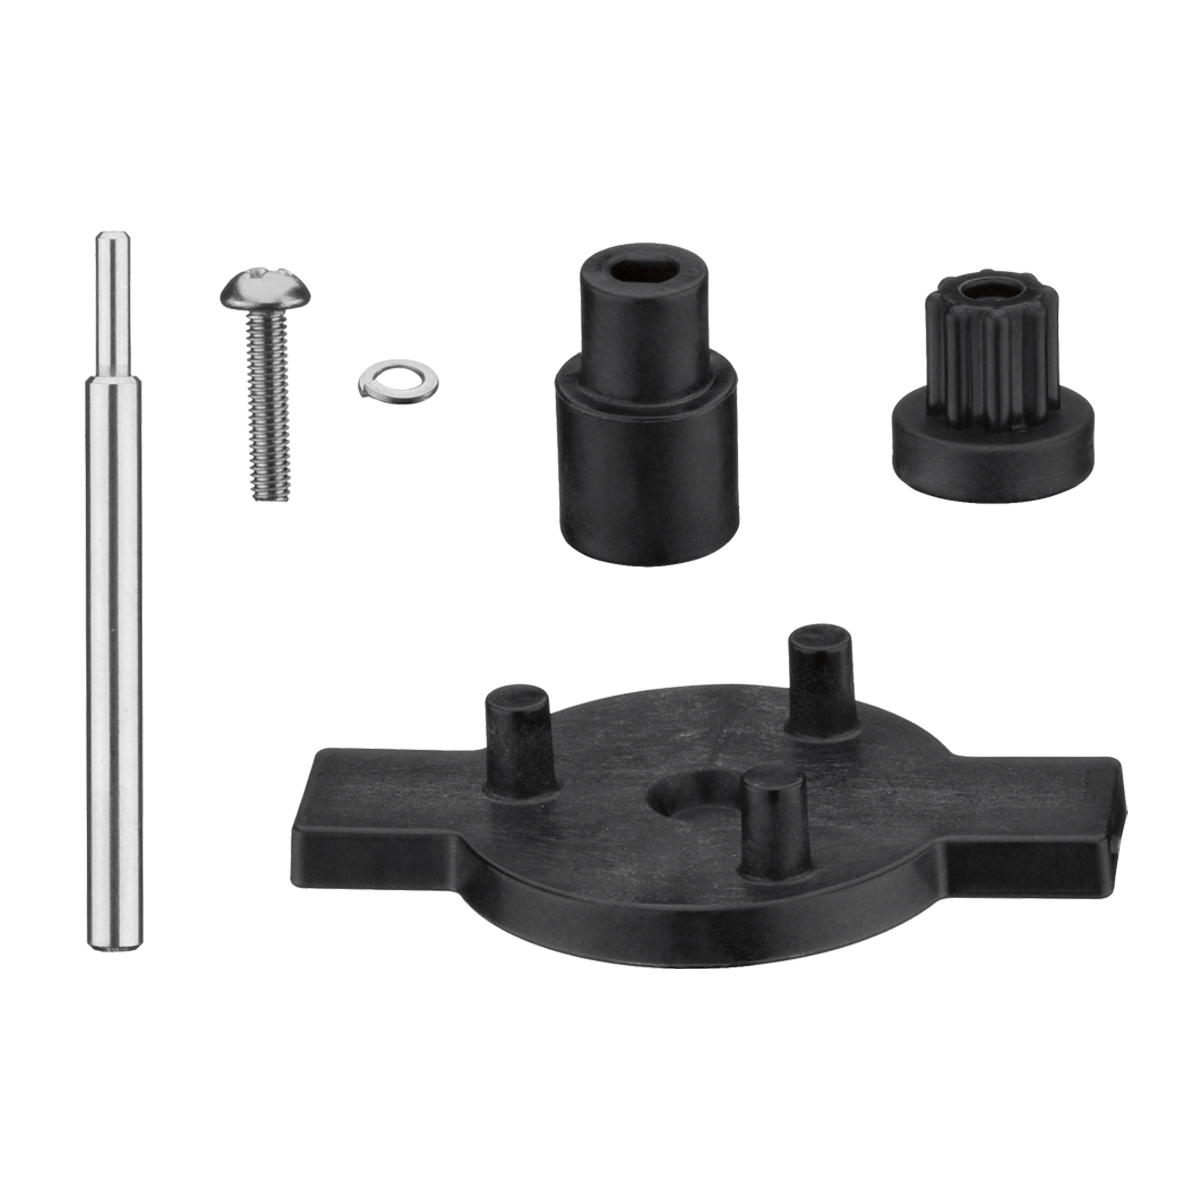 https://www.waringcommercialproducts.com/files/accessories/cac104-blender-coupling-replacement-kit.jpg